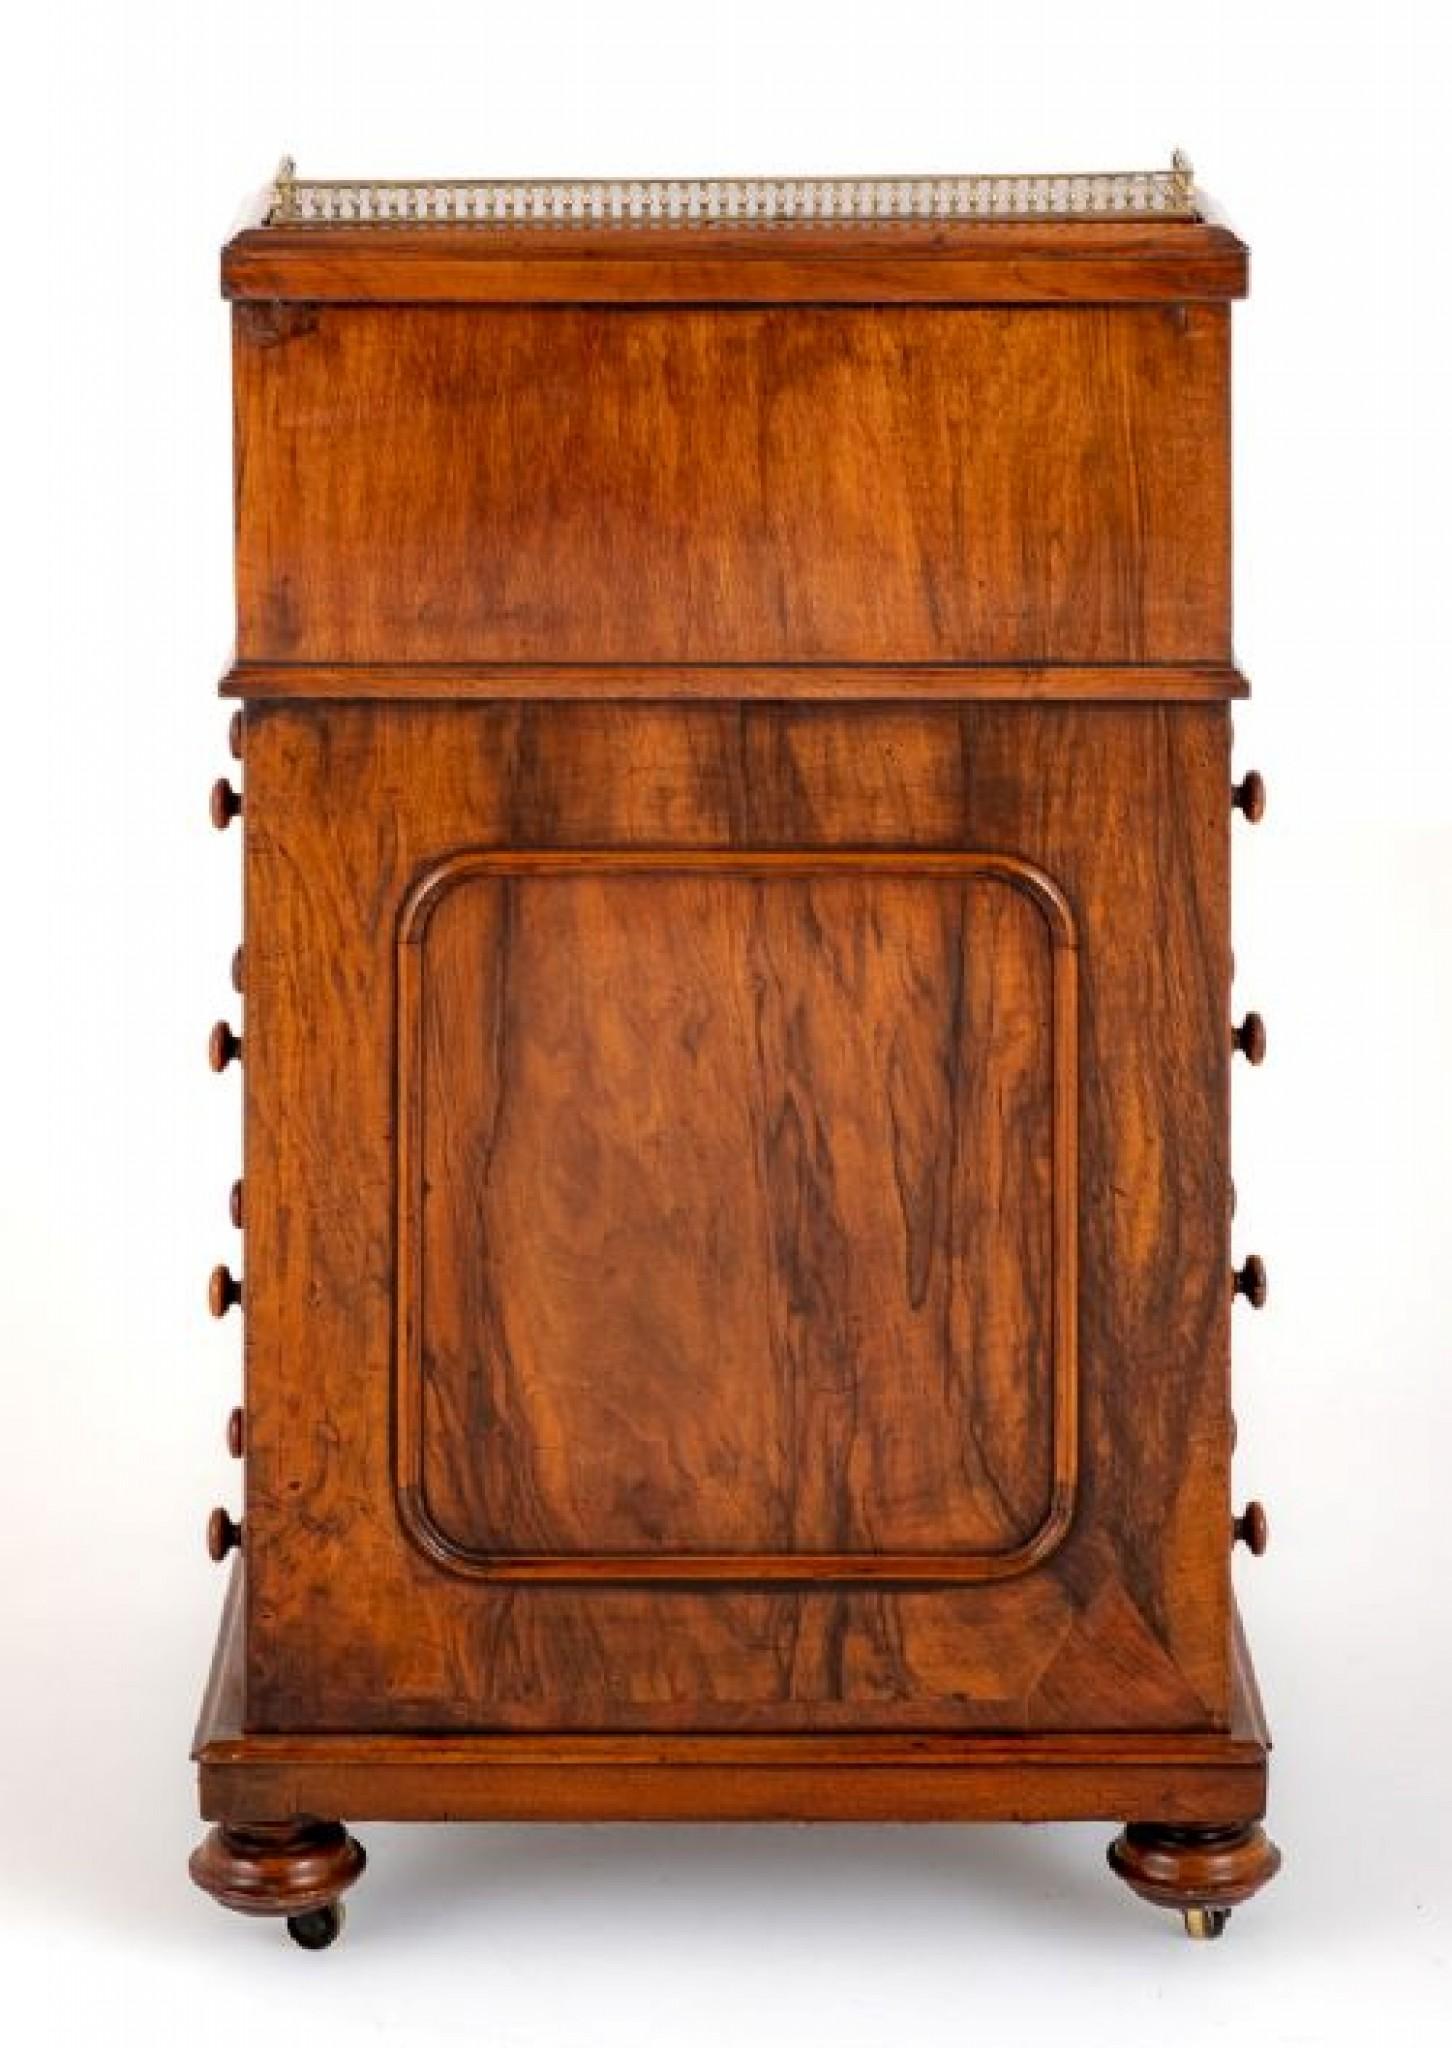 Here we have a typical Victorian walnut Davenport.
circa 1860
The Davenport having 4 mahogany lined drawers to the right hand side and 4 faux drawers to the left hand side.
The Davenport is supported on turned feet with shaped and carved